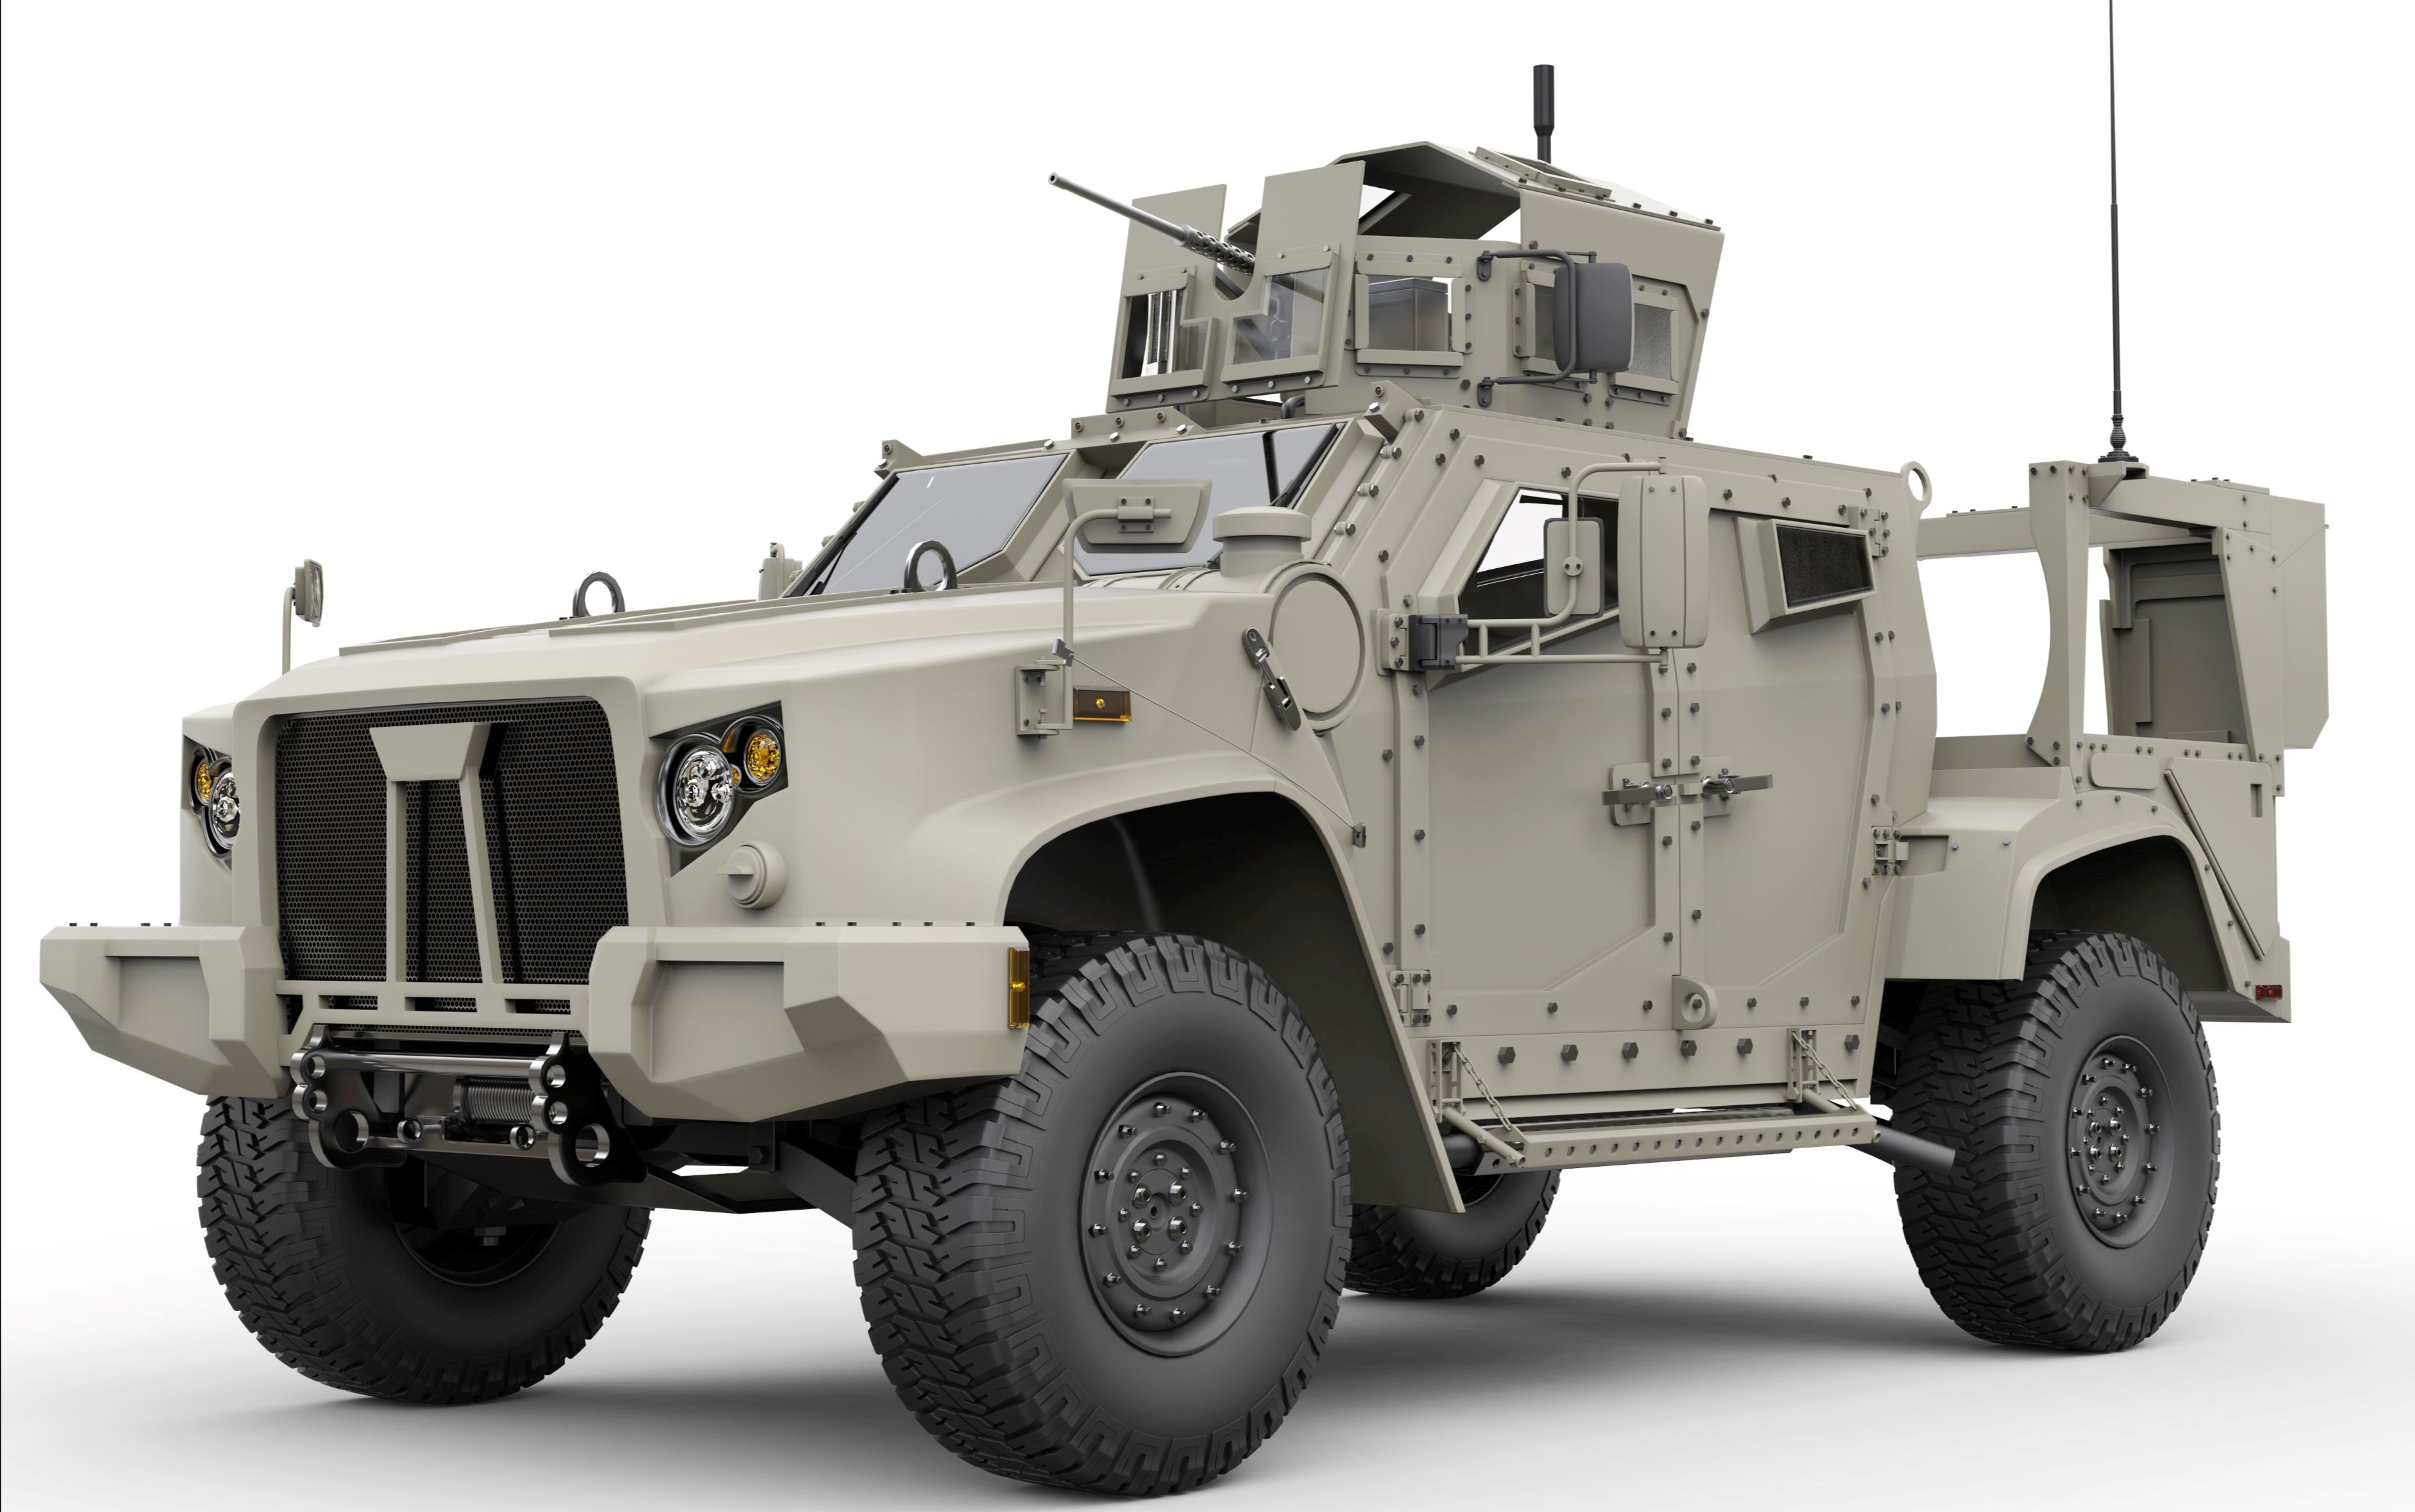 AMPHENOL POWER CONNECTORS ENABLE THE ELECTRIFICATION OF MILITARY VEHICLES